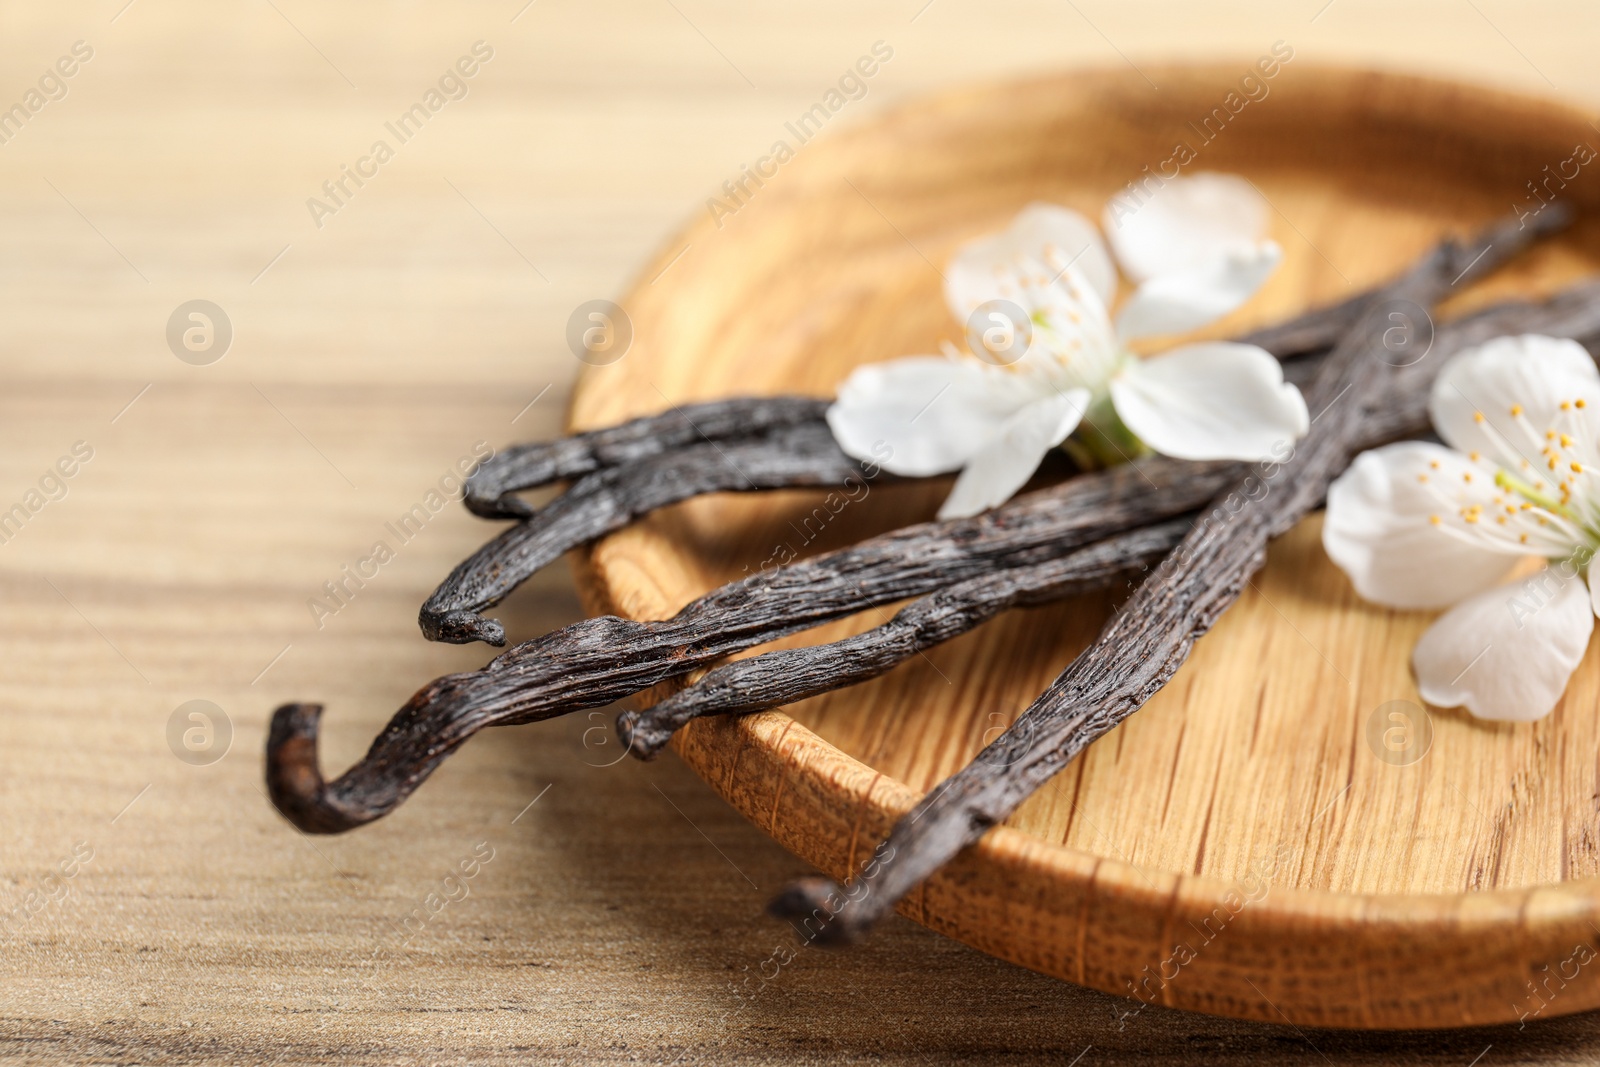 Photo of Plate with aromatic vanilla sticks and flowers on wooden background, closeup